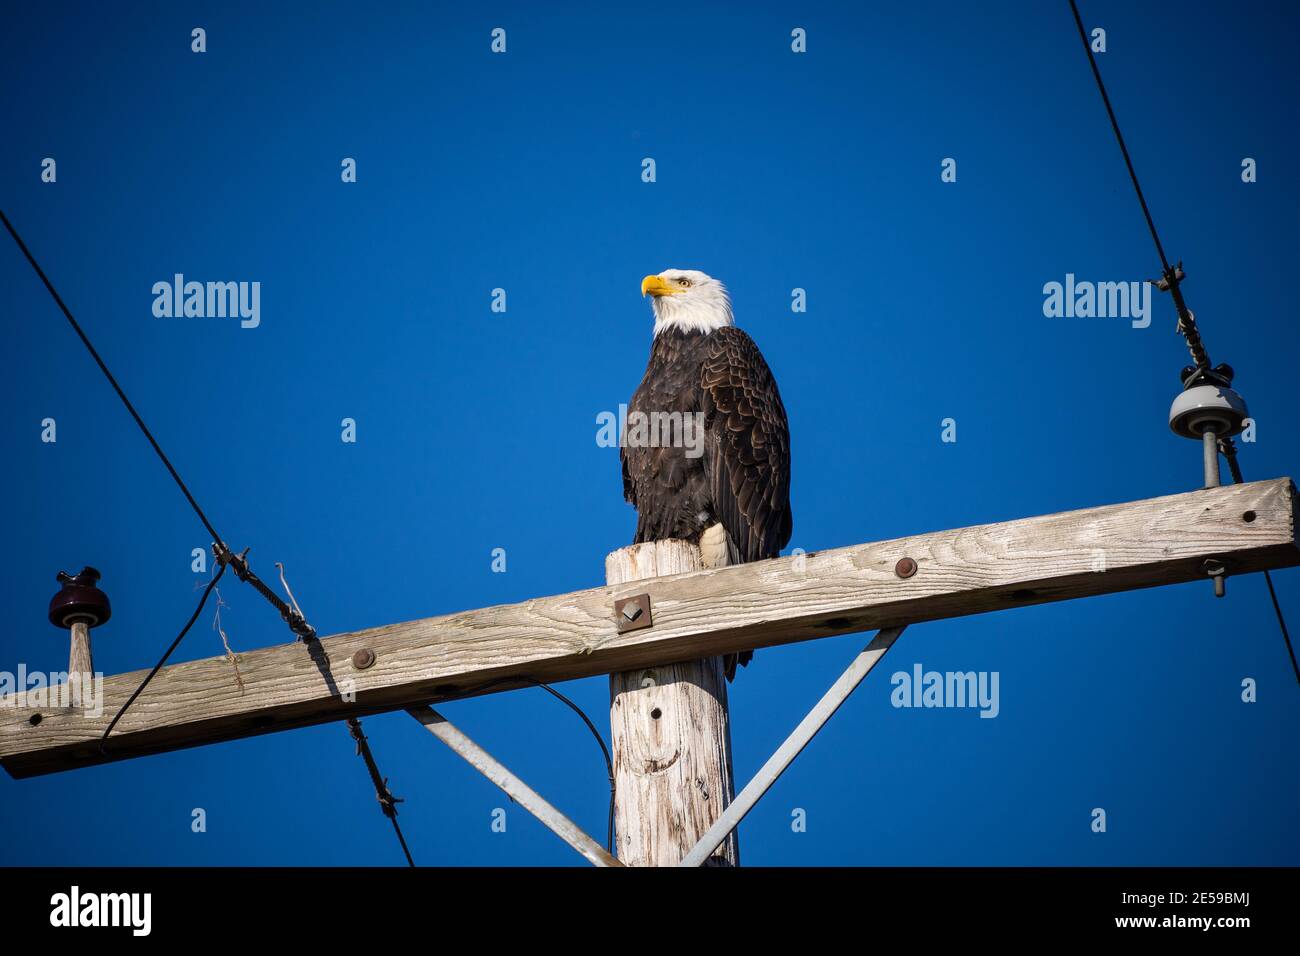 Bald eagle (Haliaeetus leucocephalus) is a bird of prey found in North America. It is found near large bodies of open water with an abundant food supp Stock Photo